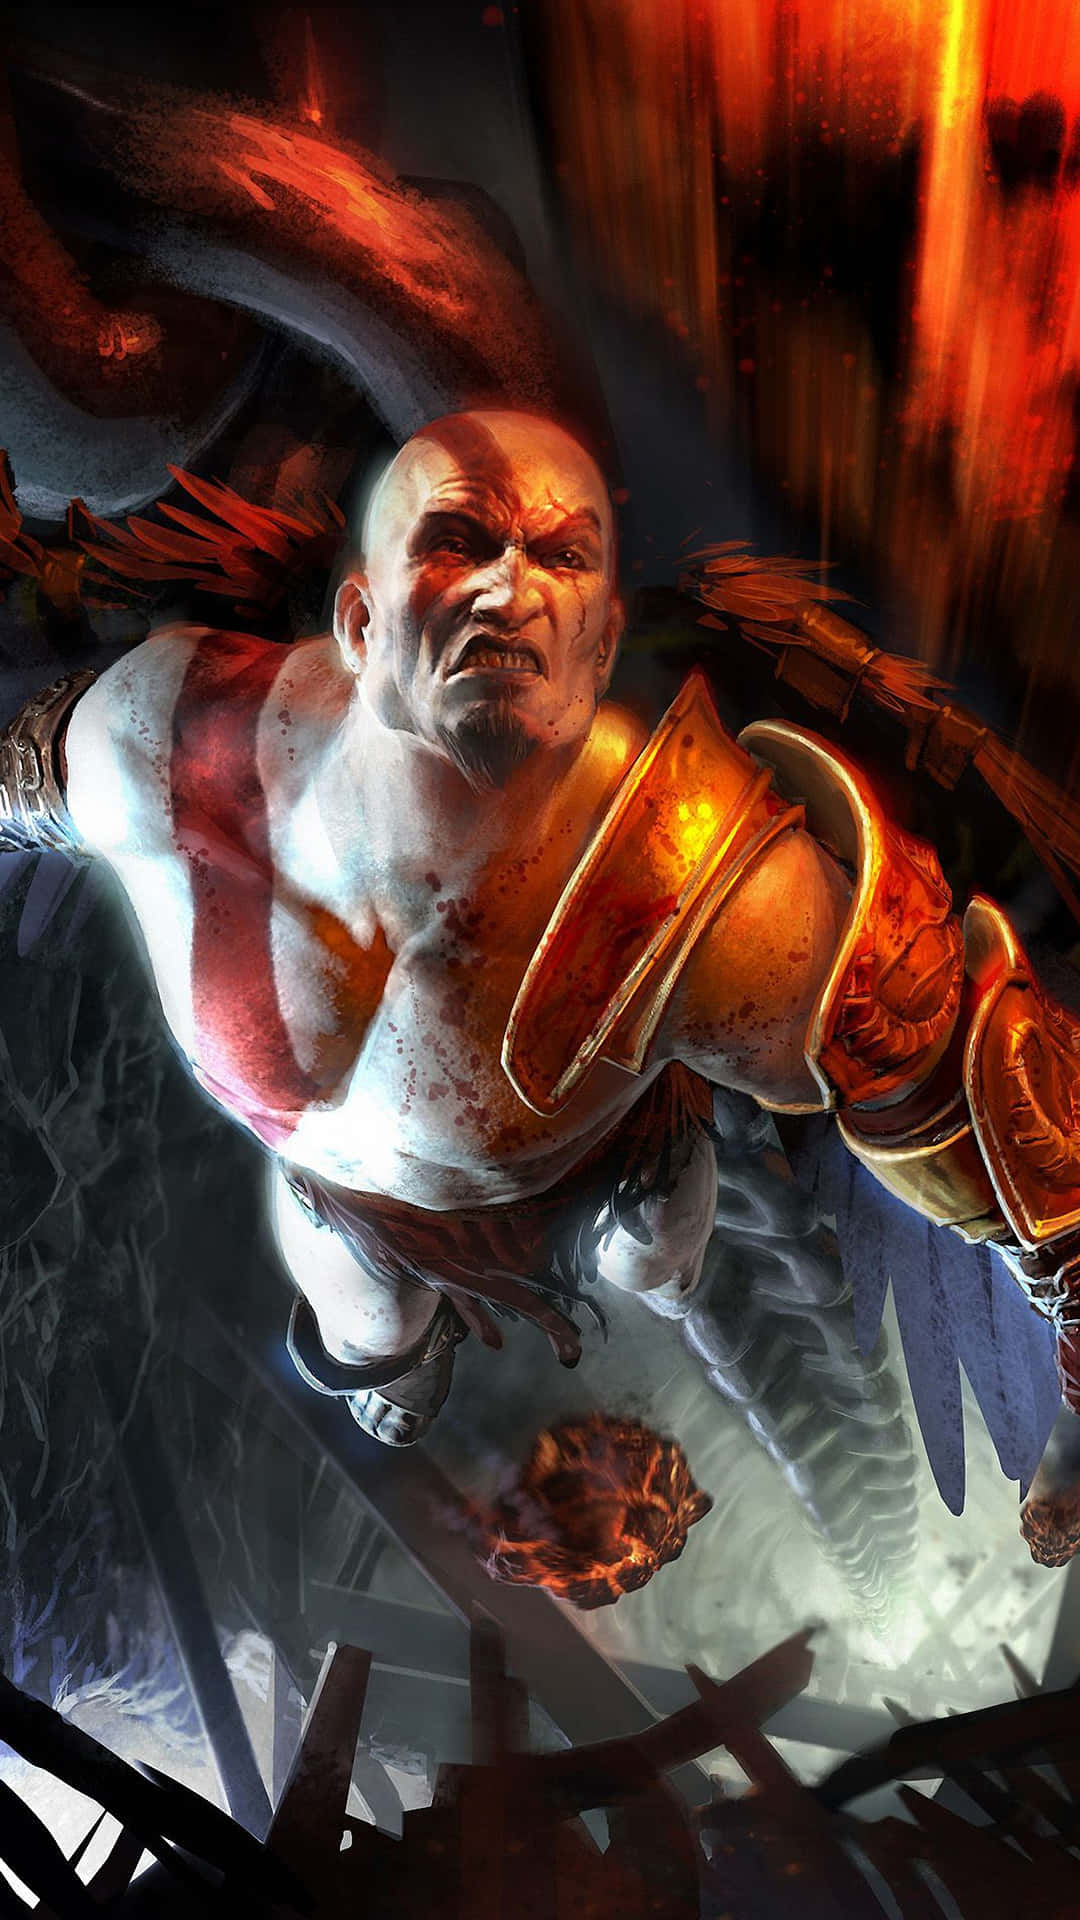 "Kratos embarks on a formidable journey in the fifth installment of Sony's acclaimed God of War series." Wallpaper